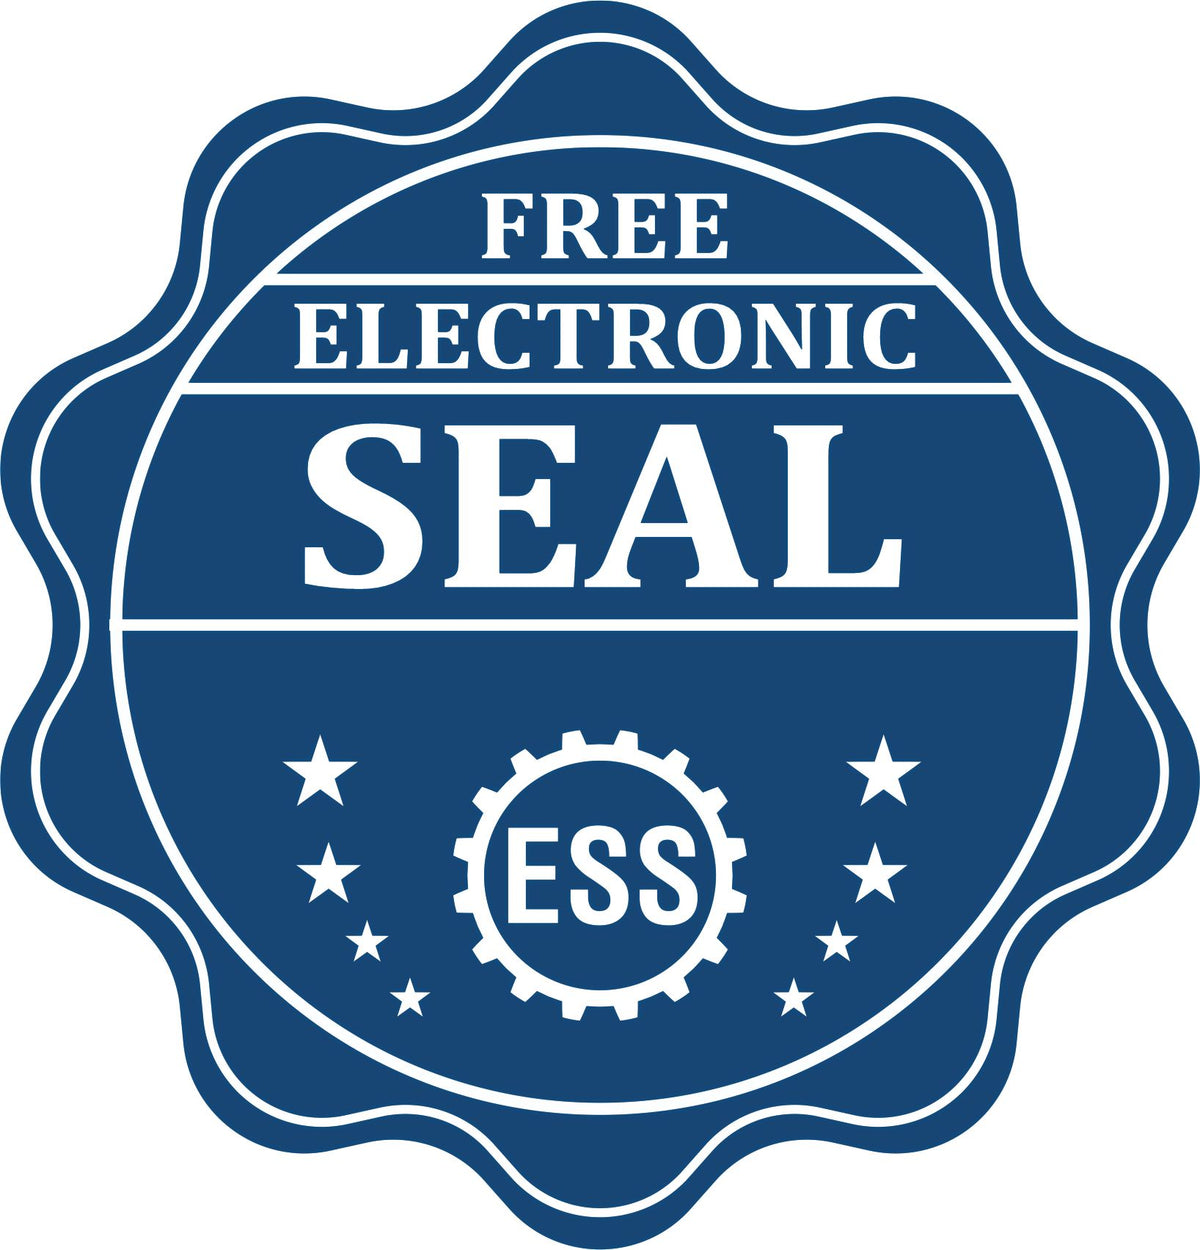 A badge showing a free electronic seal for the Hybrid Idaho Architect Seal with stars and the ESS gear on the emblem.